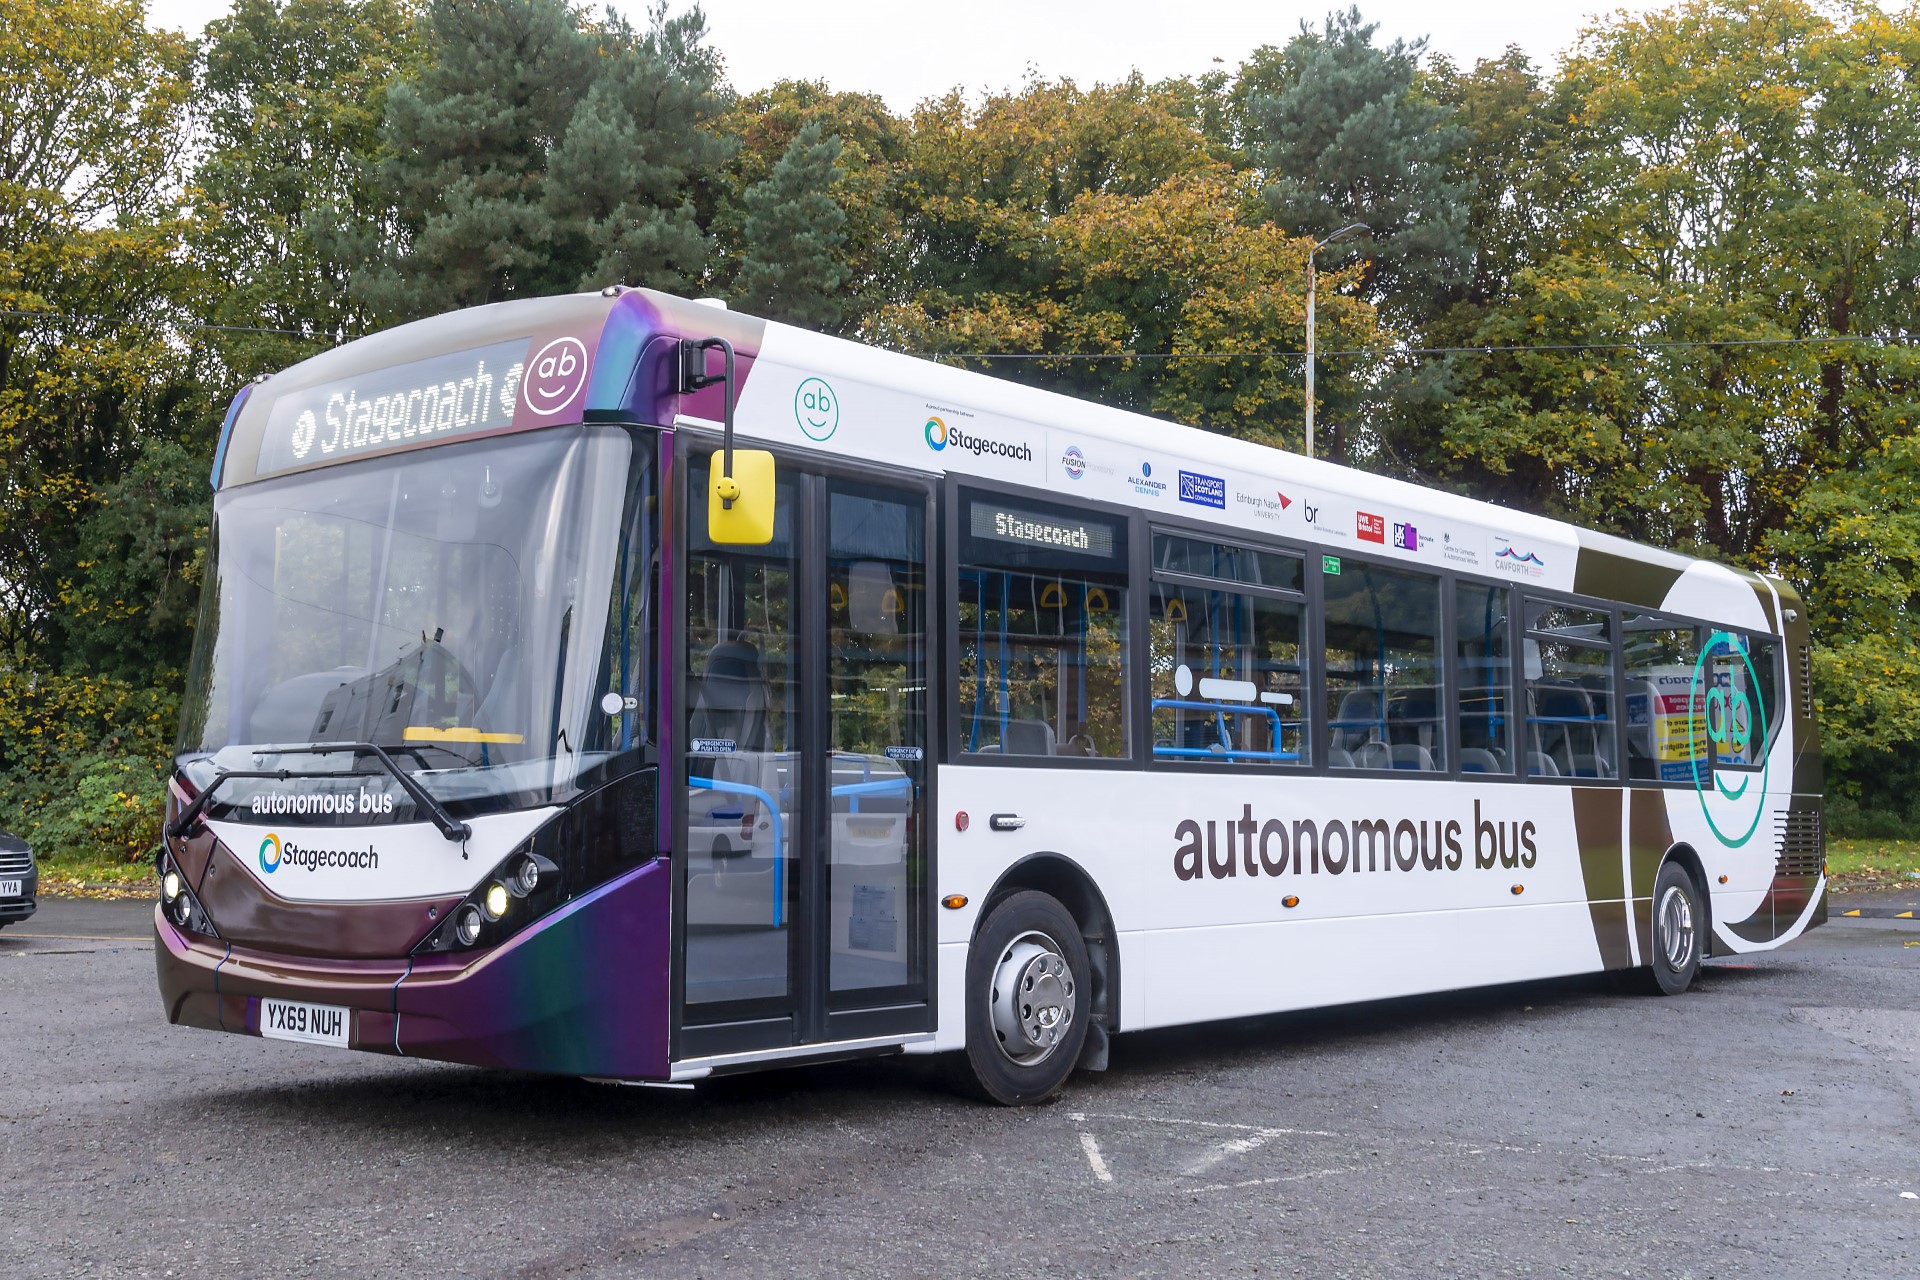 fully autonomous buses a literature review and future research directions